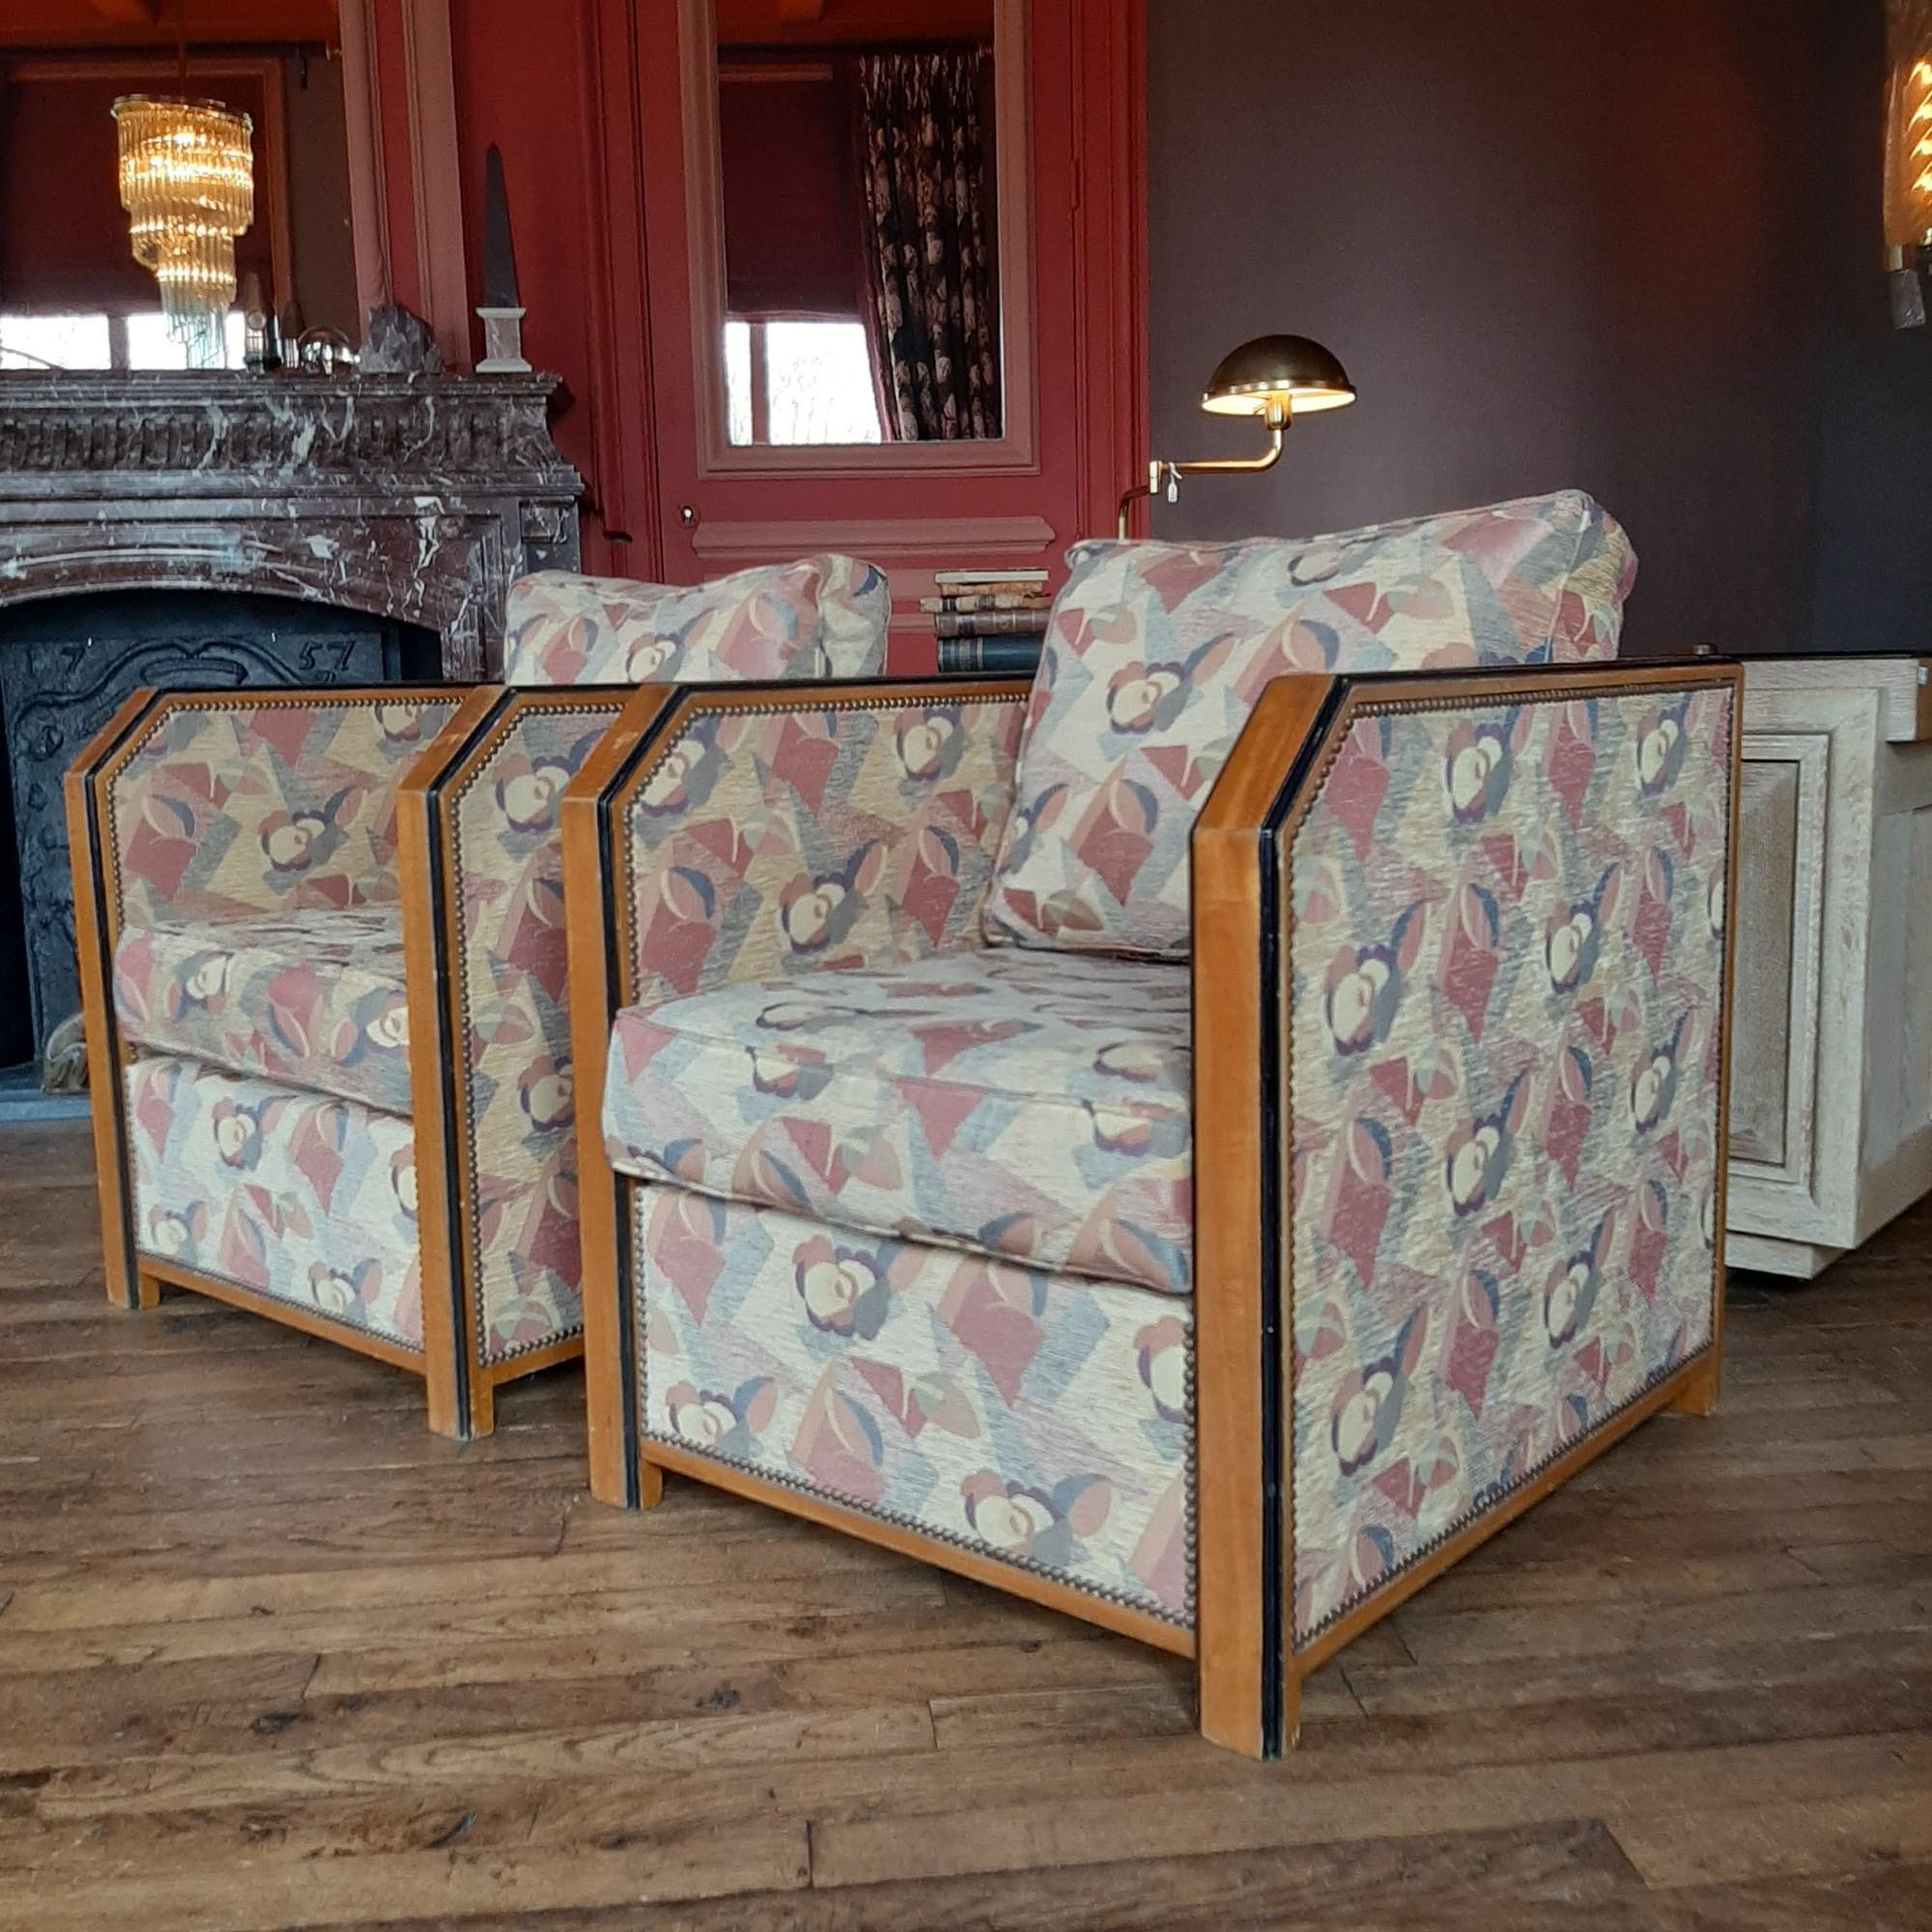 A pair of upholstered large French Art Deco club chairs. With their angular look and newly upholstered Art Deco inspired fabric, these arm chairs inspired by the style of Emile-Jacques Ruhlmann are stunning eye catchers from the 1930s. Super